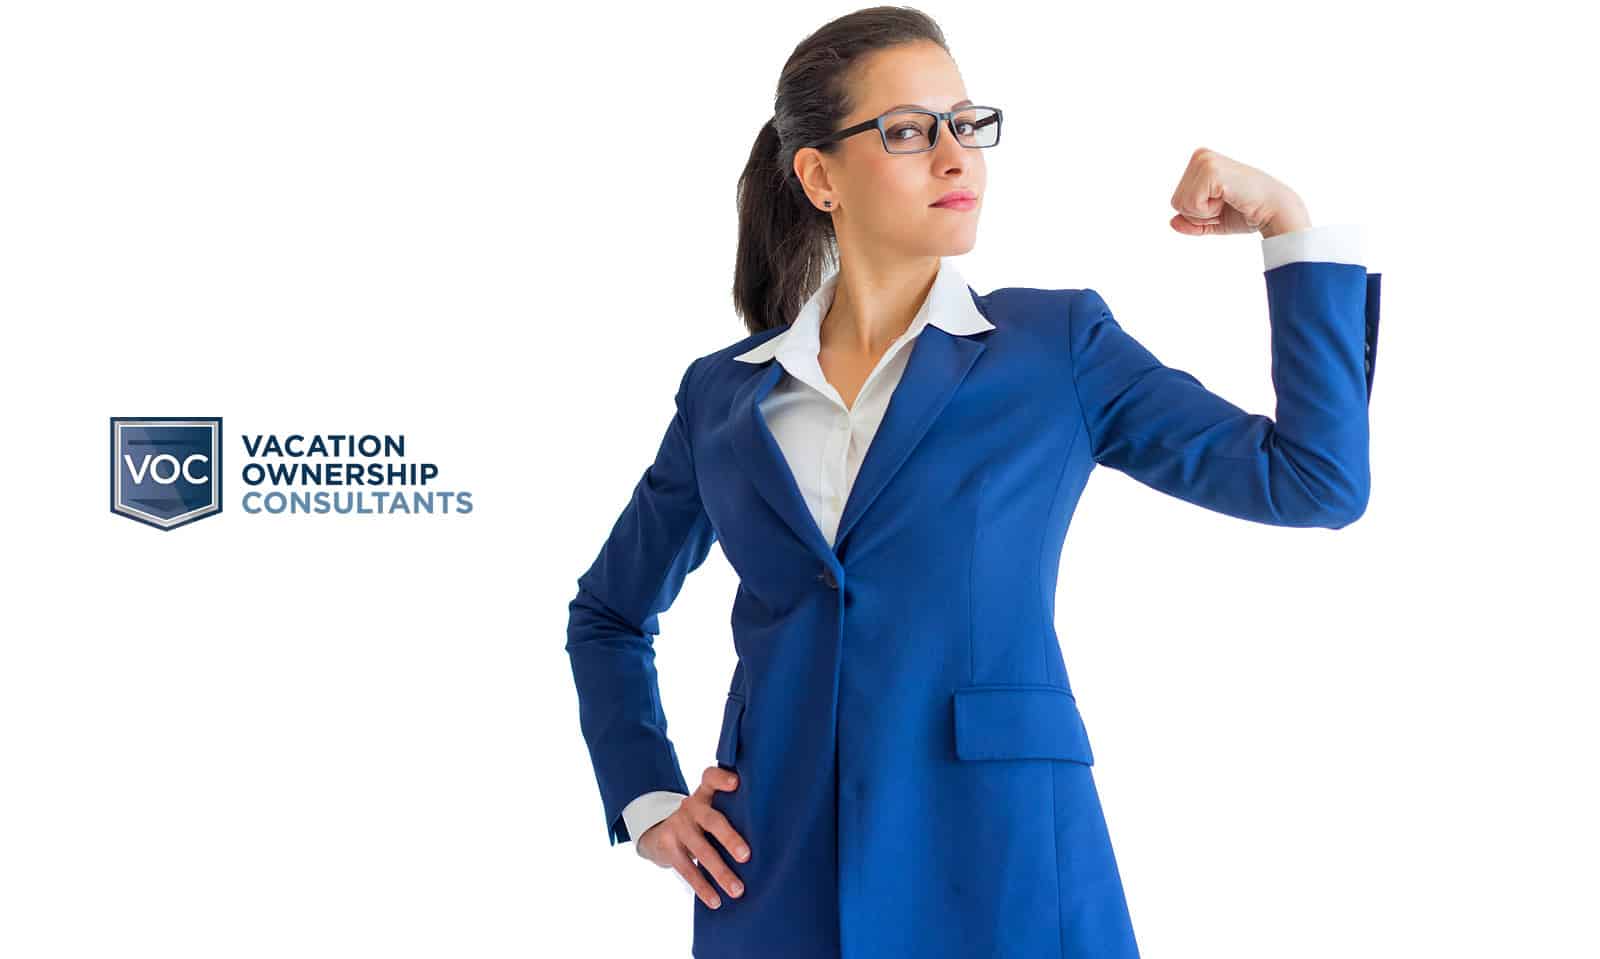 woman-flexing-muscle-in-blue-suit-representing-voc-right-to-use-timeshare-cancellation-options-in-comparison-to-travel-clubs-across-united-states